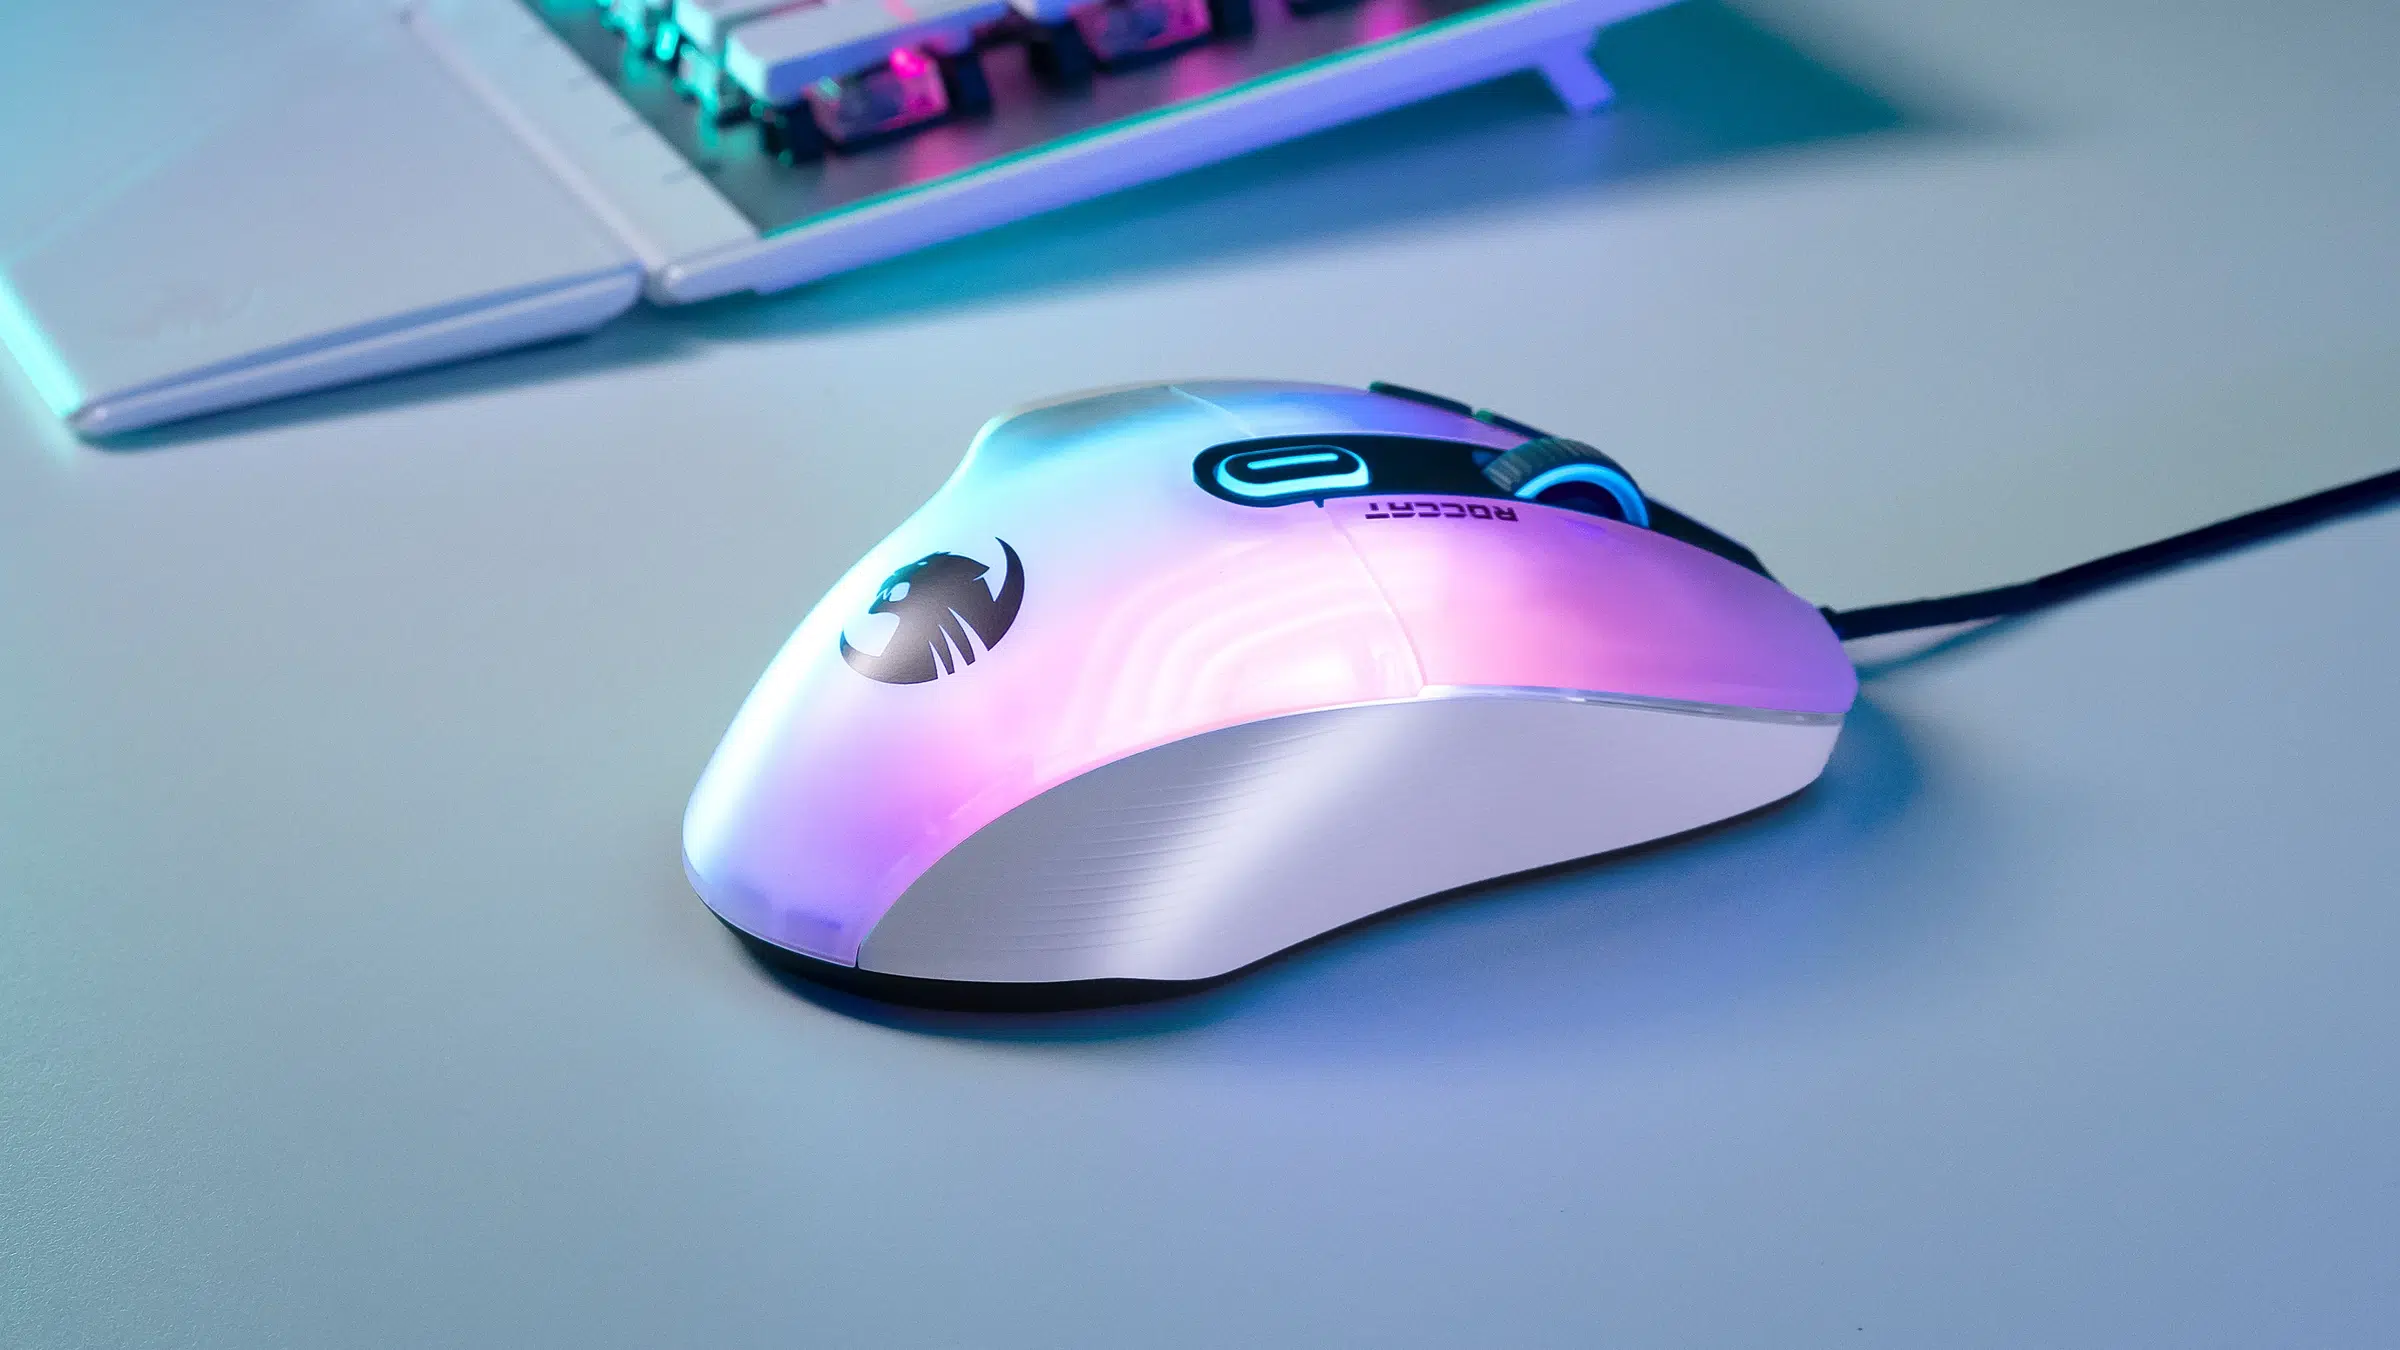 Roccat Kone XP Gaming Mouse Review